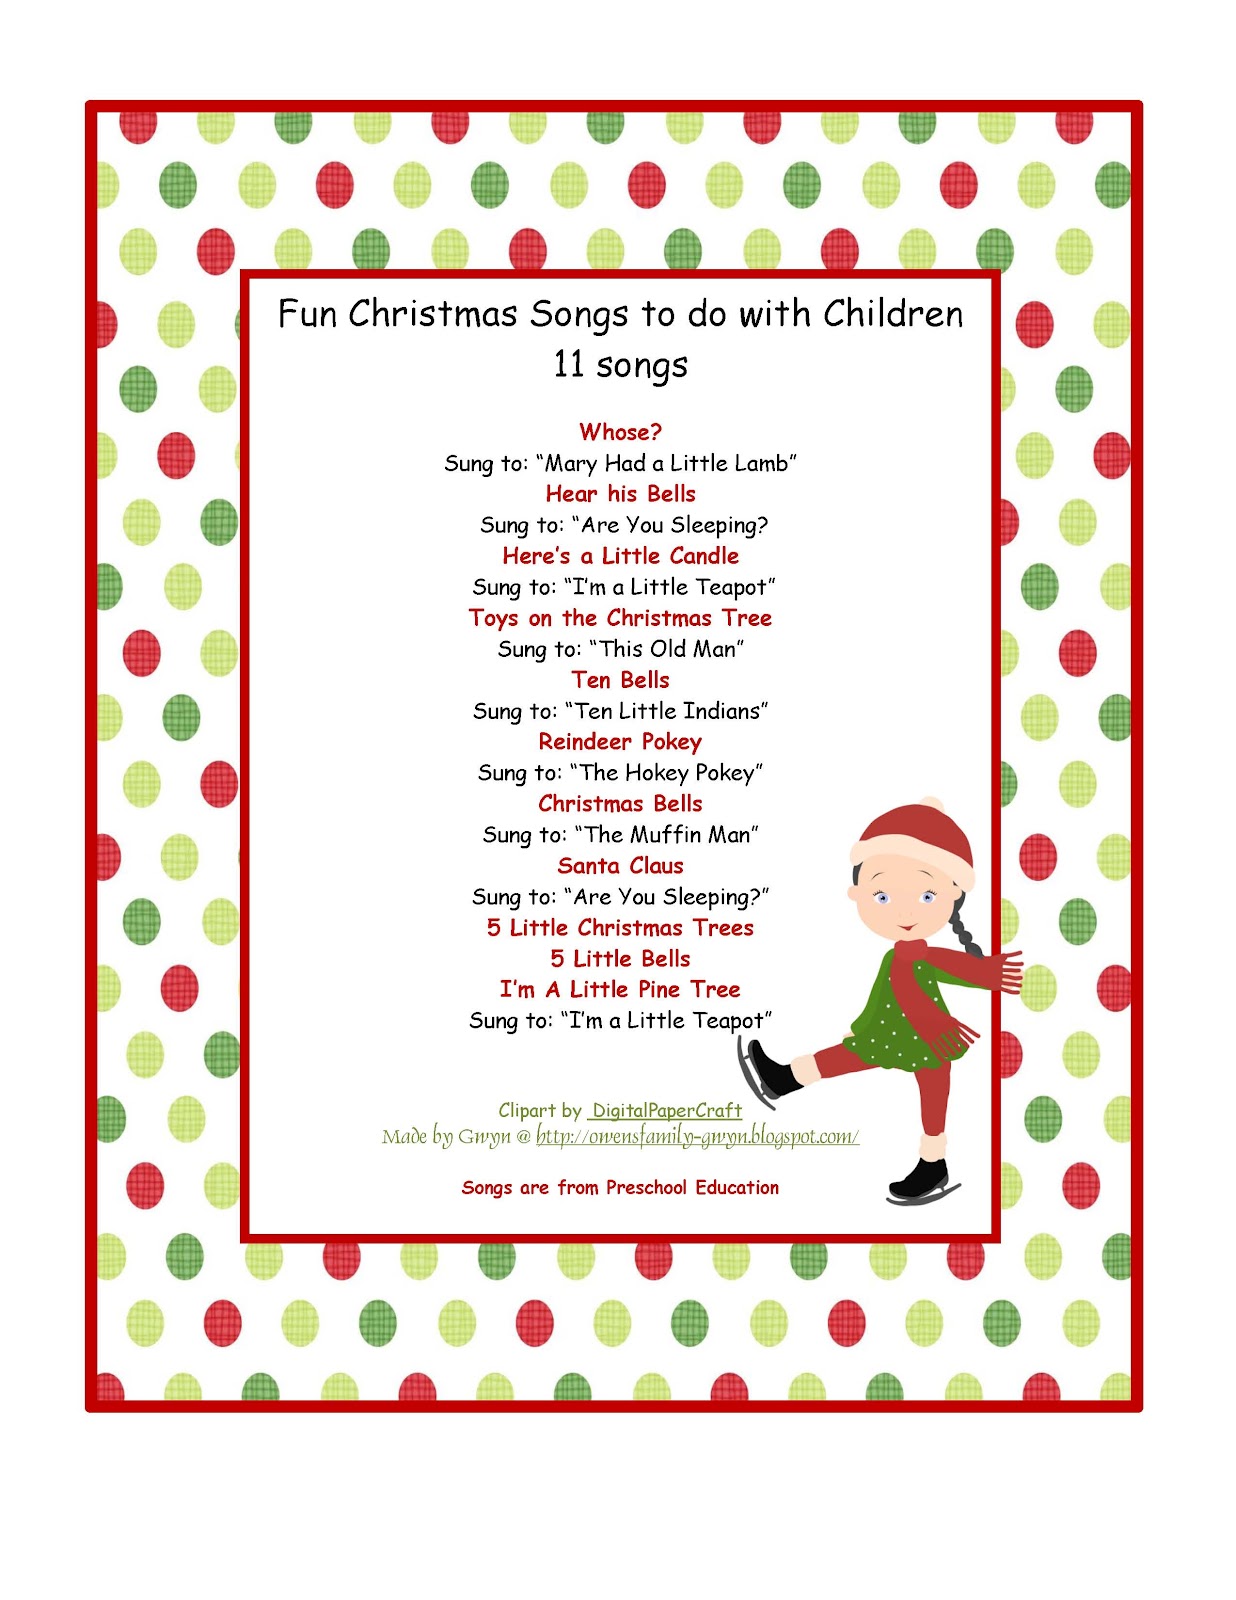 Christmas Printable Images Gallery Category Page 2 - printablee.com